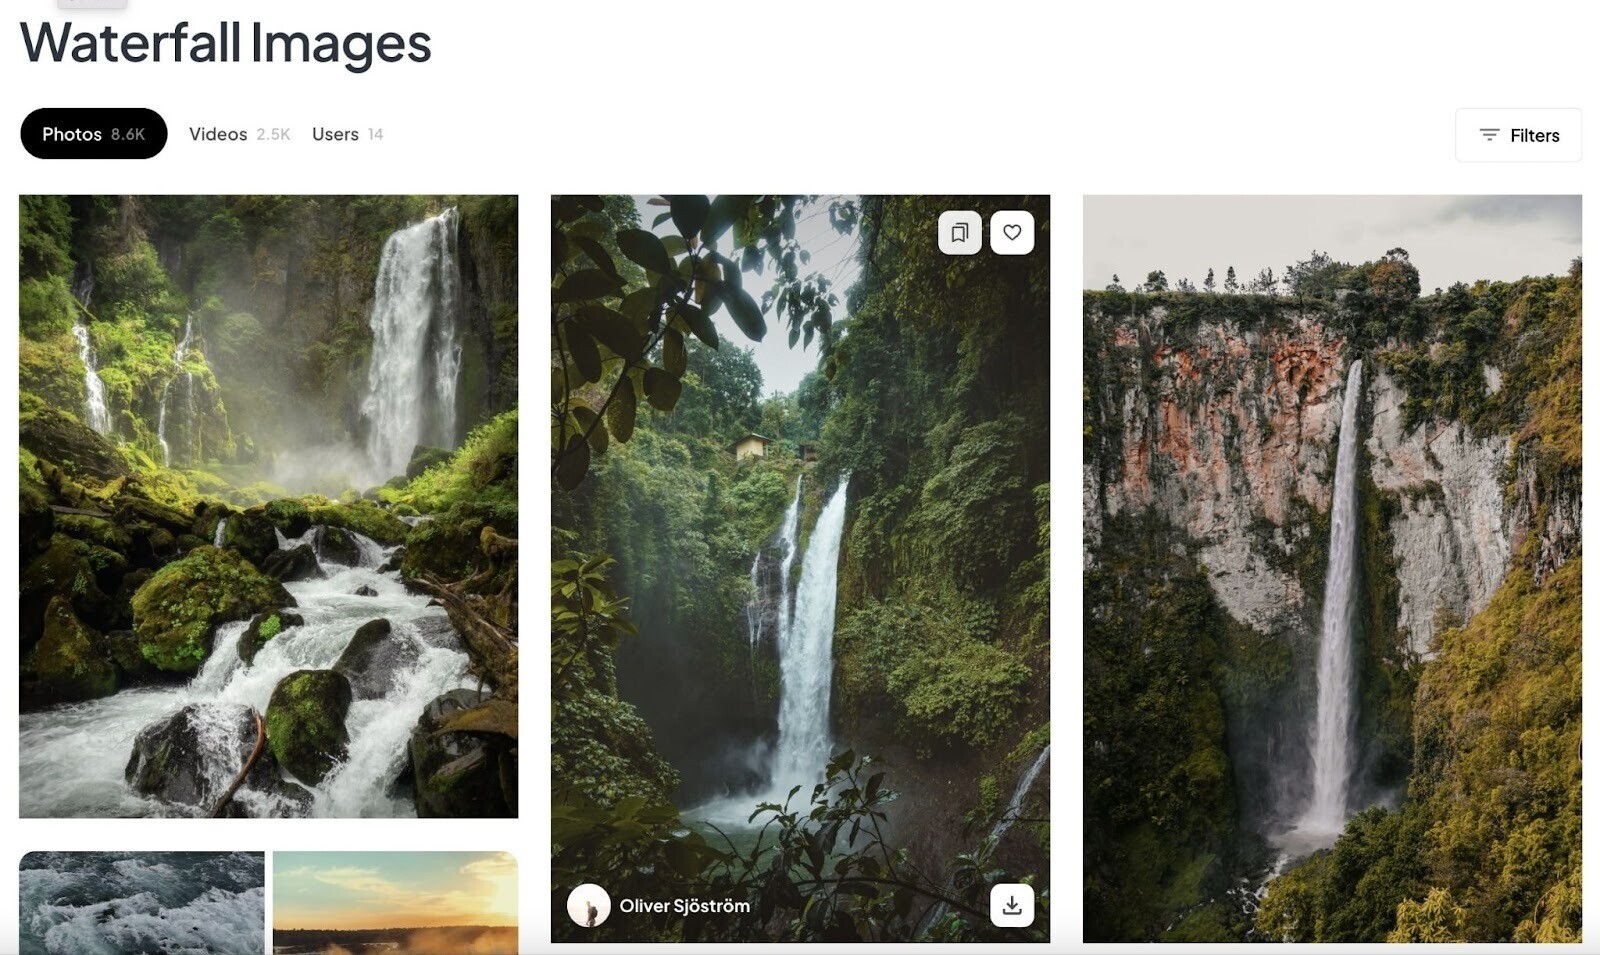 An example of "waterfall images" in Pexels